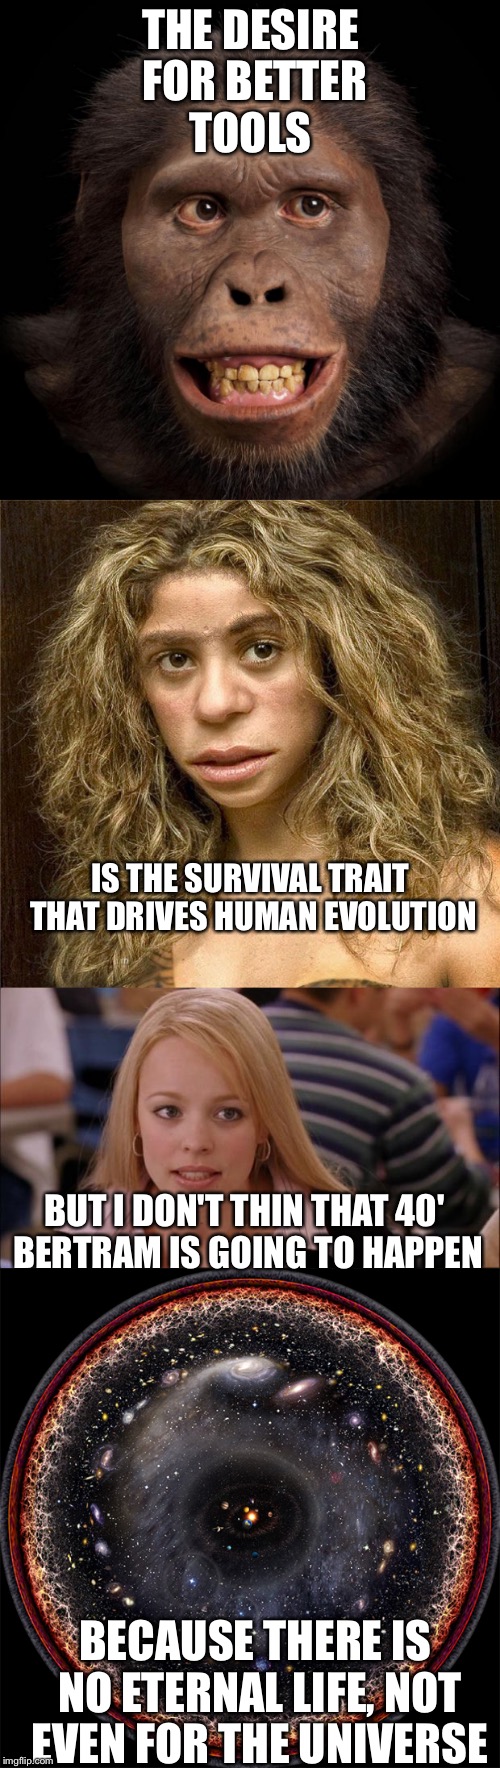 THE DESIRE FOR BETTER TOOLS IS THE SURVIVAL TRAIT THAT DRIVES HUMAN EVOLUTION BUT I DON'T THIN THAT 40' BERTRAM IS GOING TO HAPPEN BECAUSE T | made w/ Imgflip meme maker